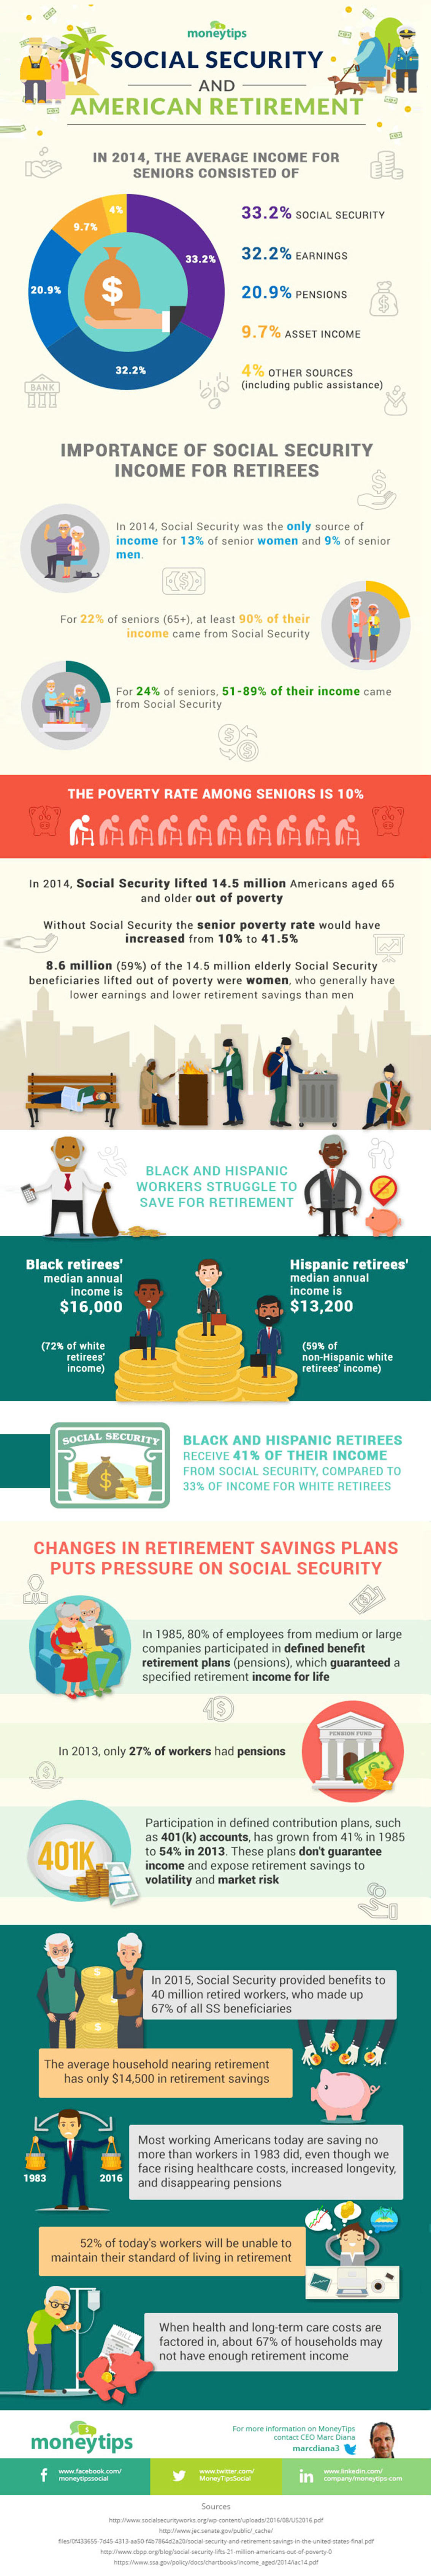 How Retired Americans Rely on Social Security Income - Retirement Infographic